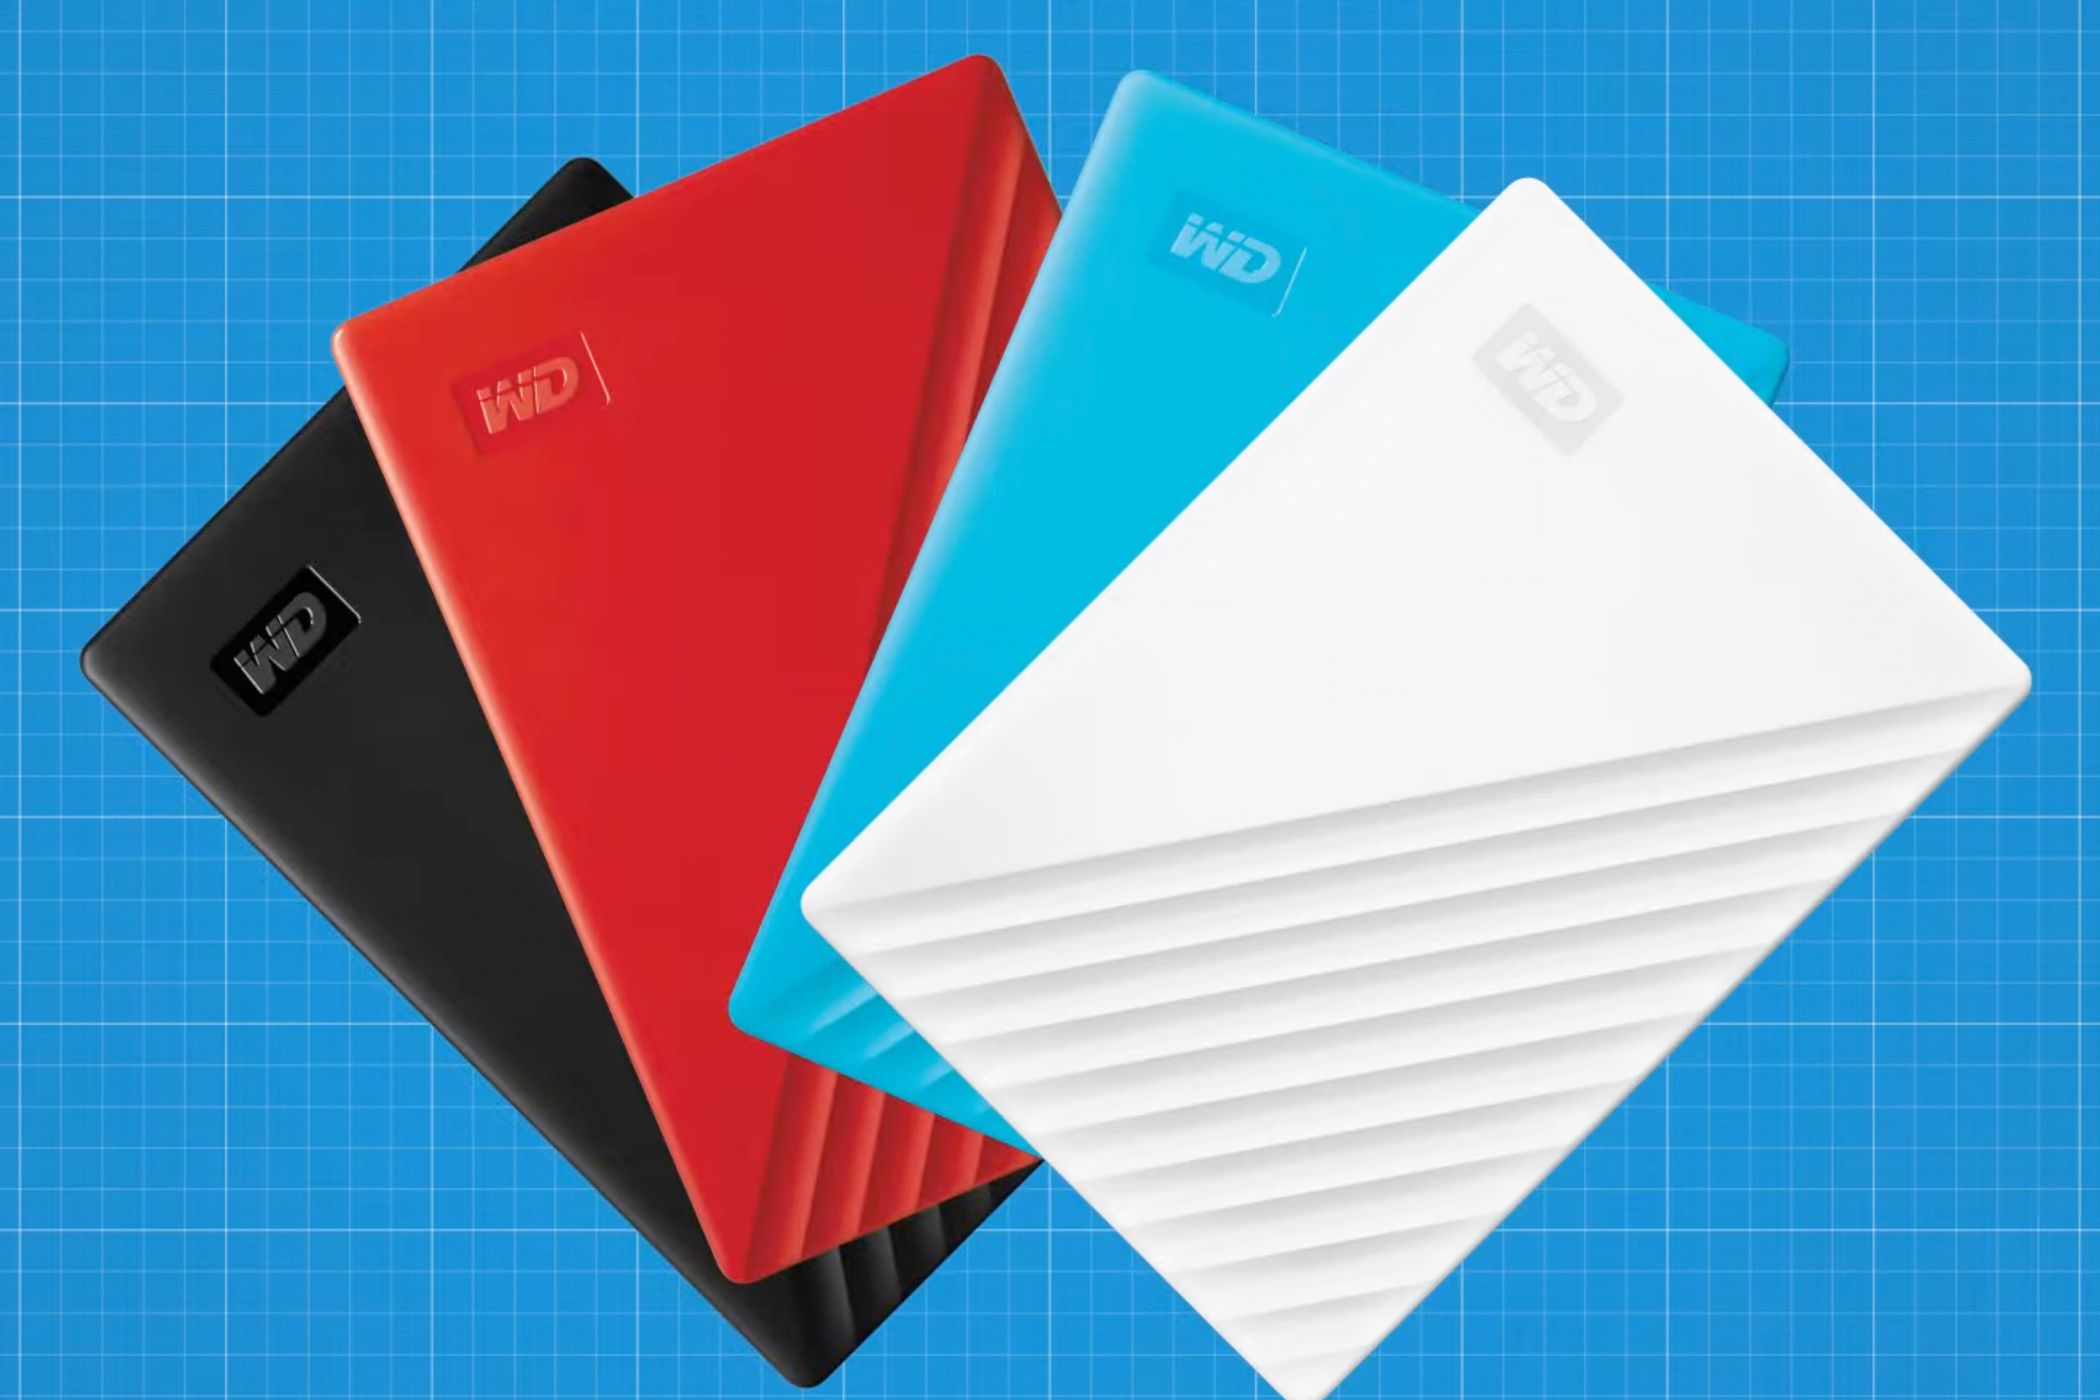 The Western Digital WD My Passport HDD in four colors.